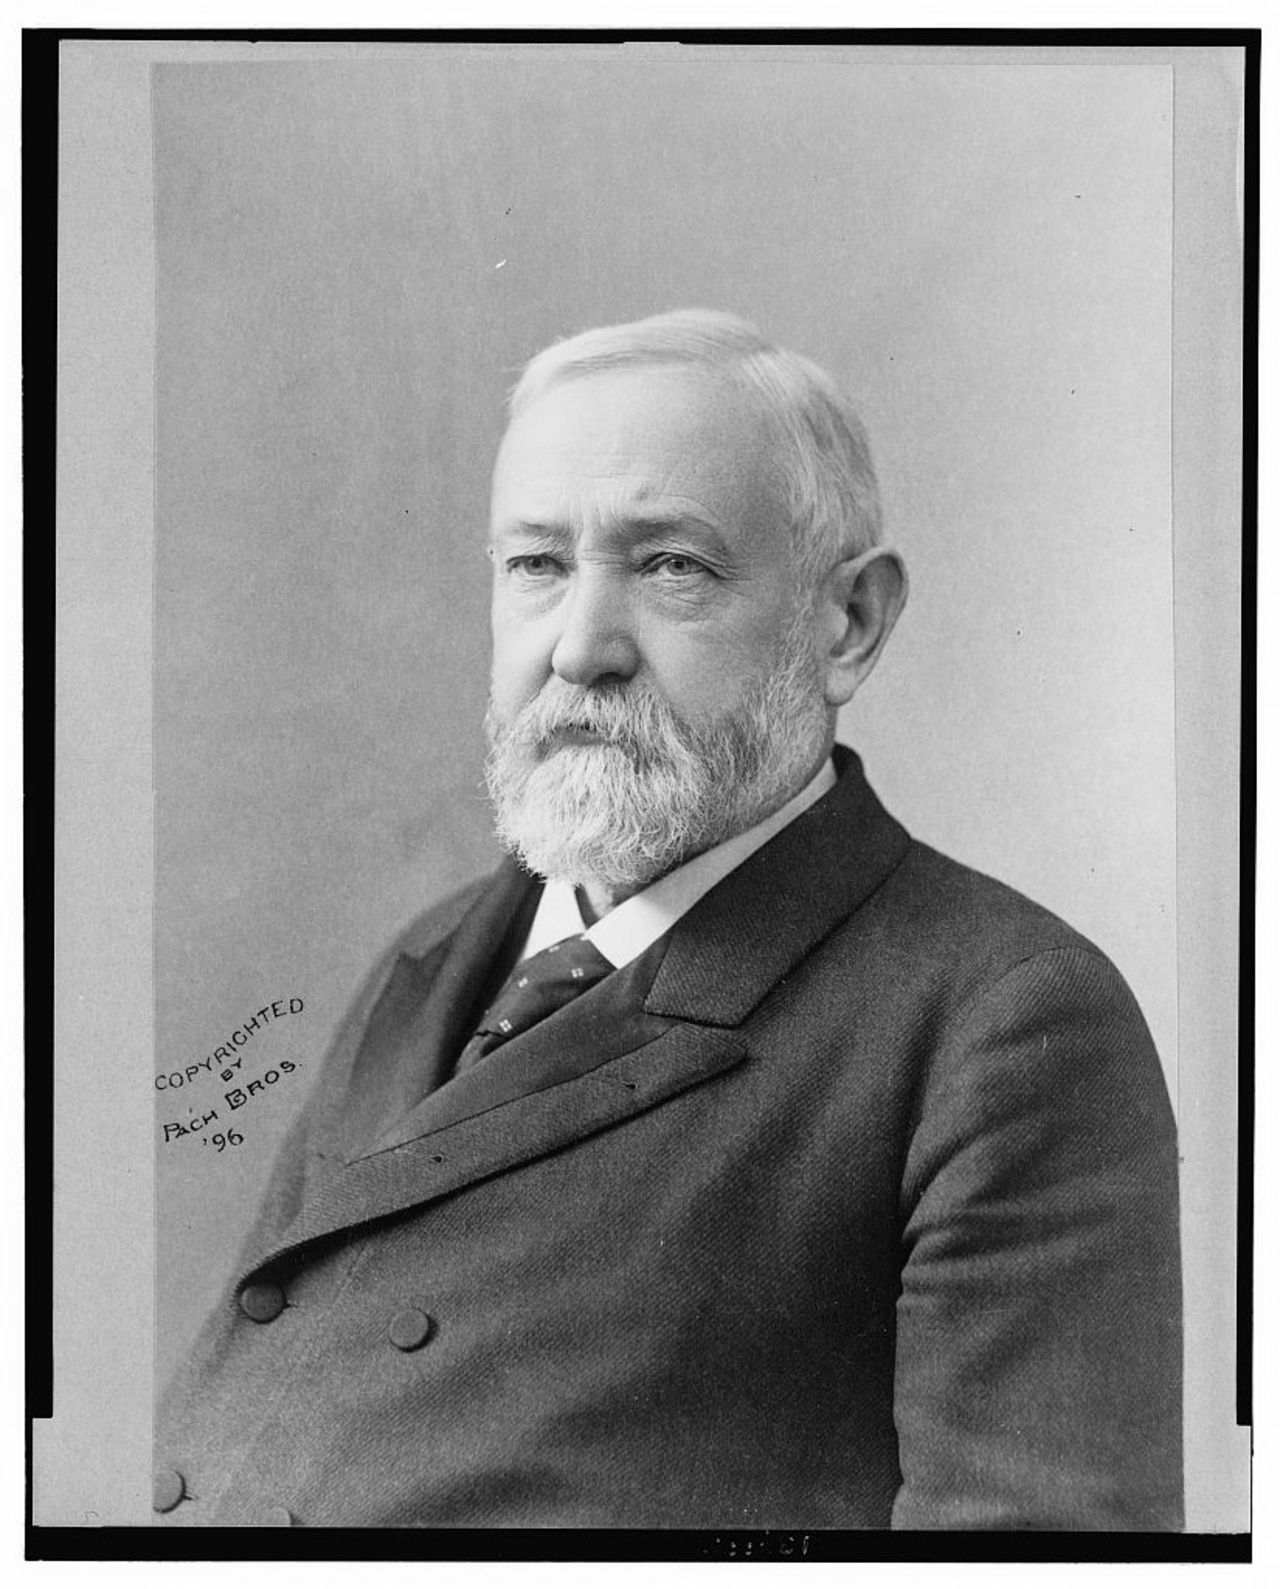 "Rejuvenated Republicanism" was Benjamin Harrison's slogan in 1888. He served as the 24th president of the United States, defeating incumbent President Grover Cleveland.